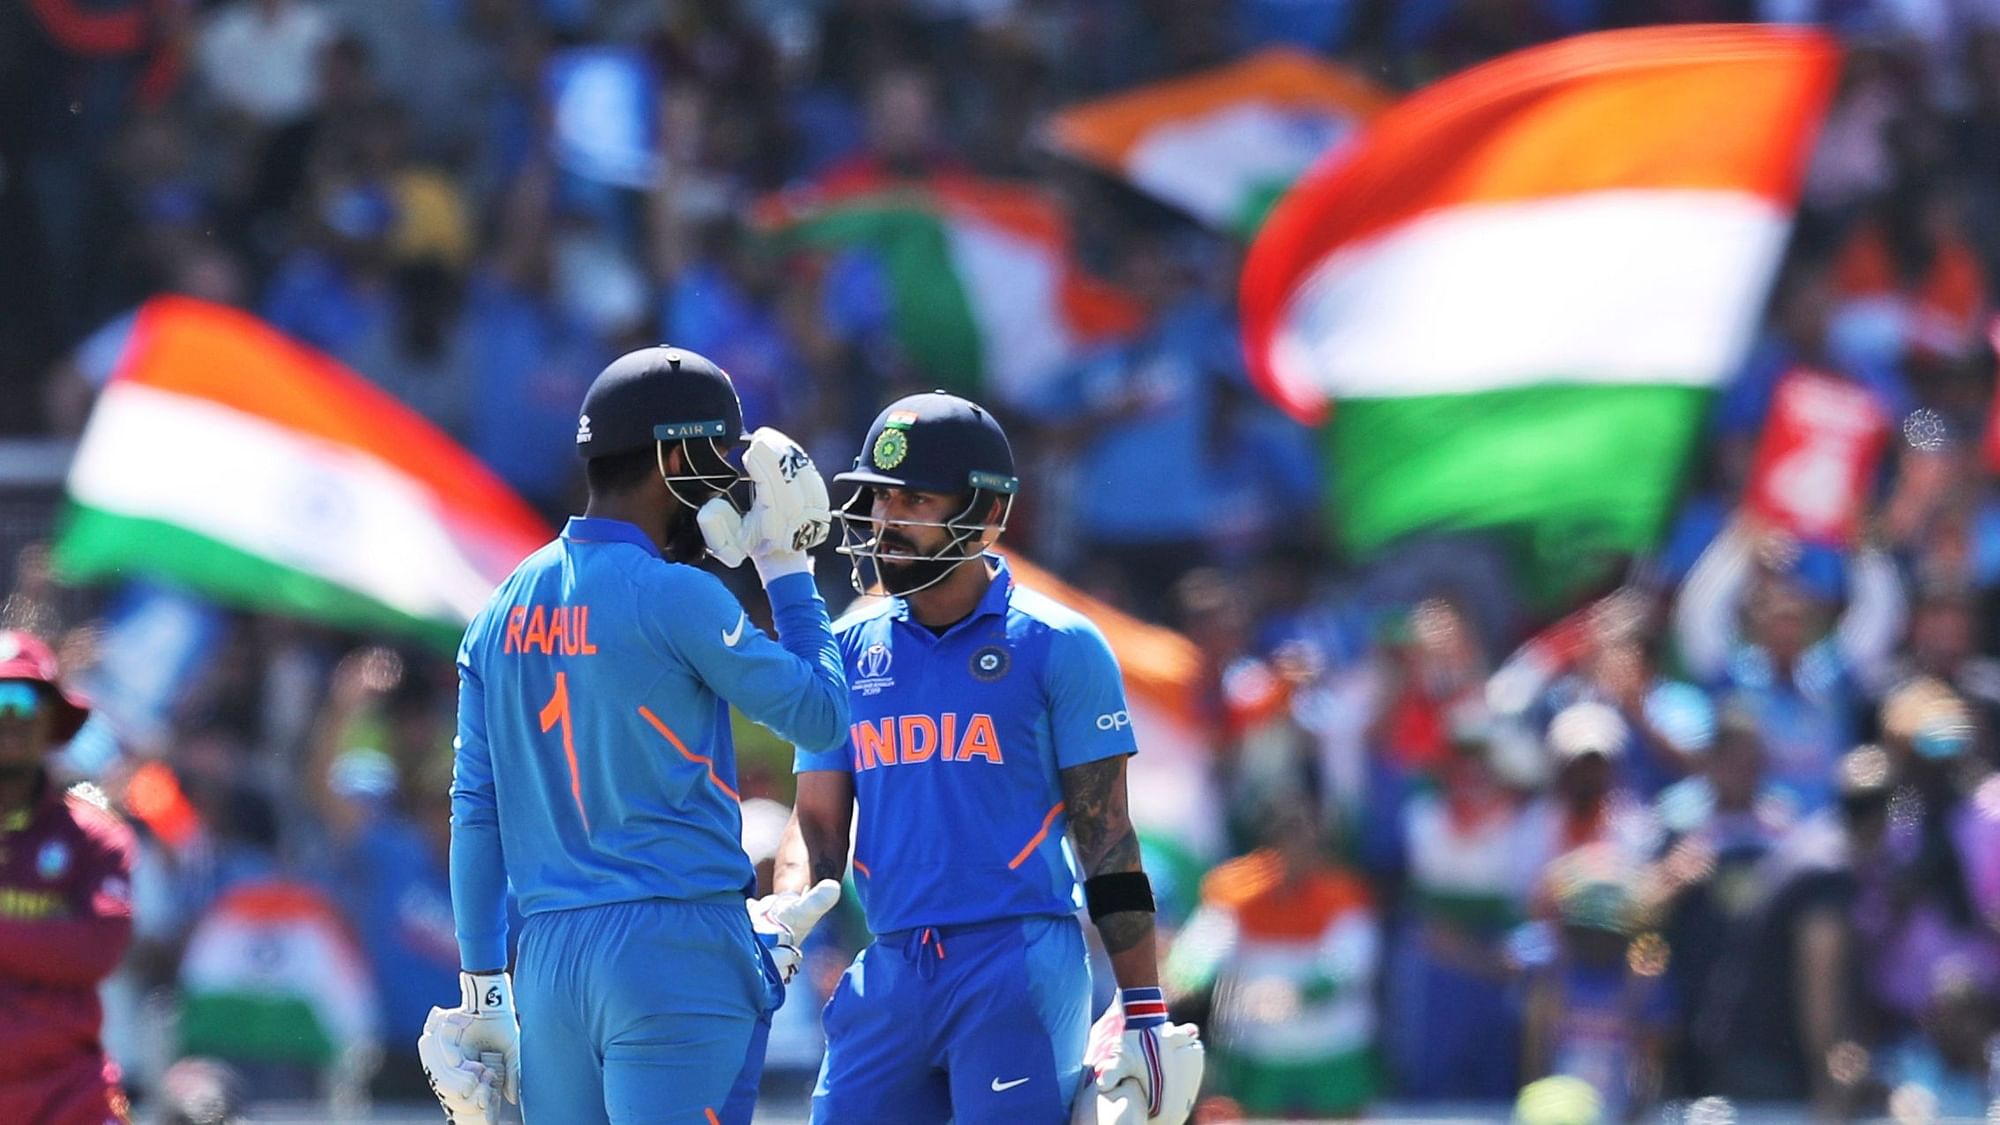 India displaced Englands and moved to the top of the ICC ODI rankings ahead of the two team’s clash at the ICC World Cup.